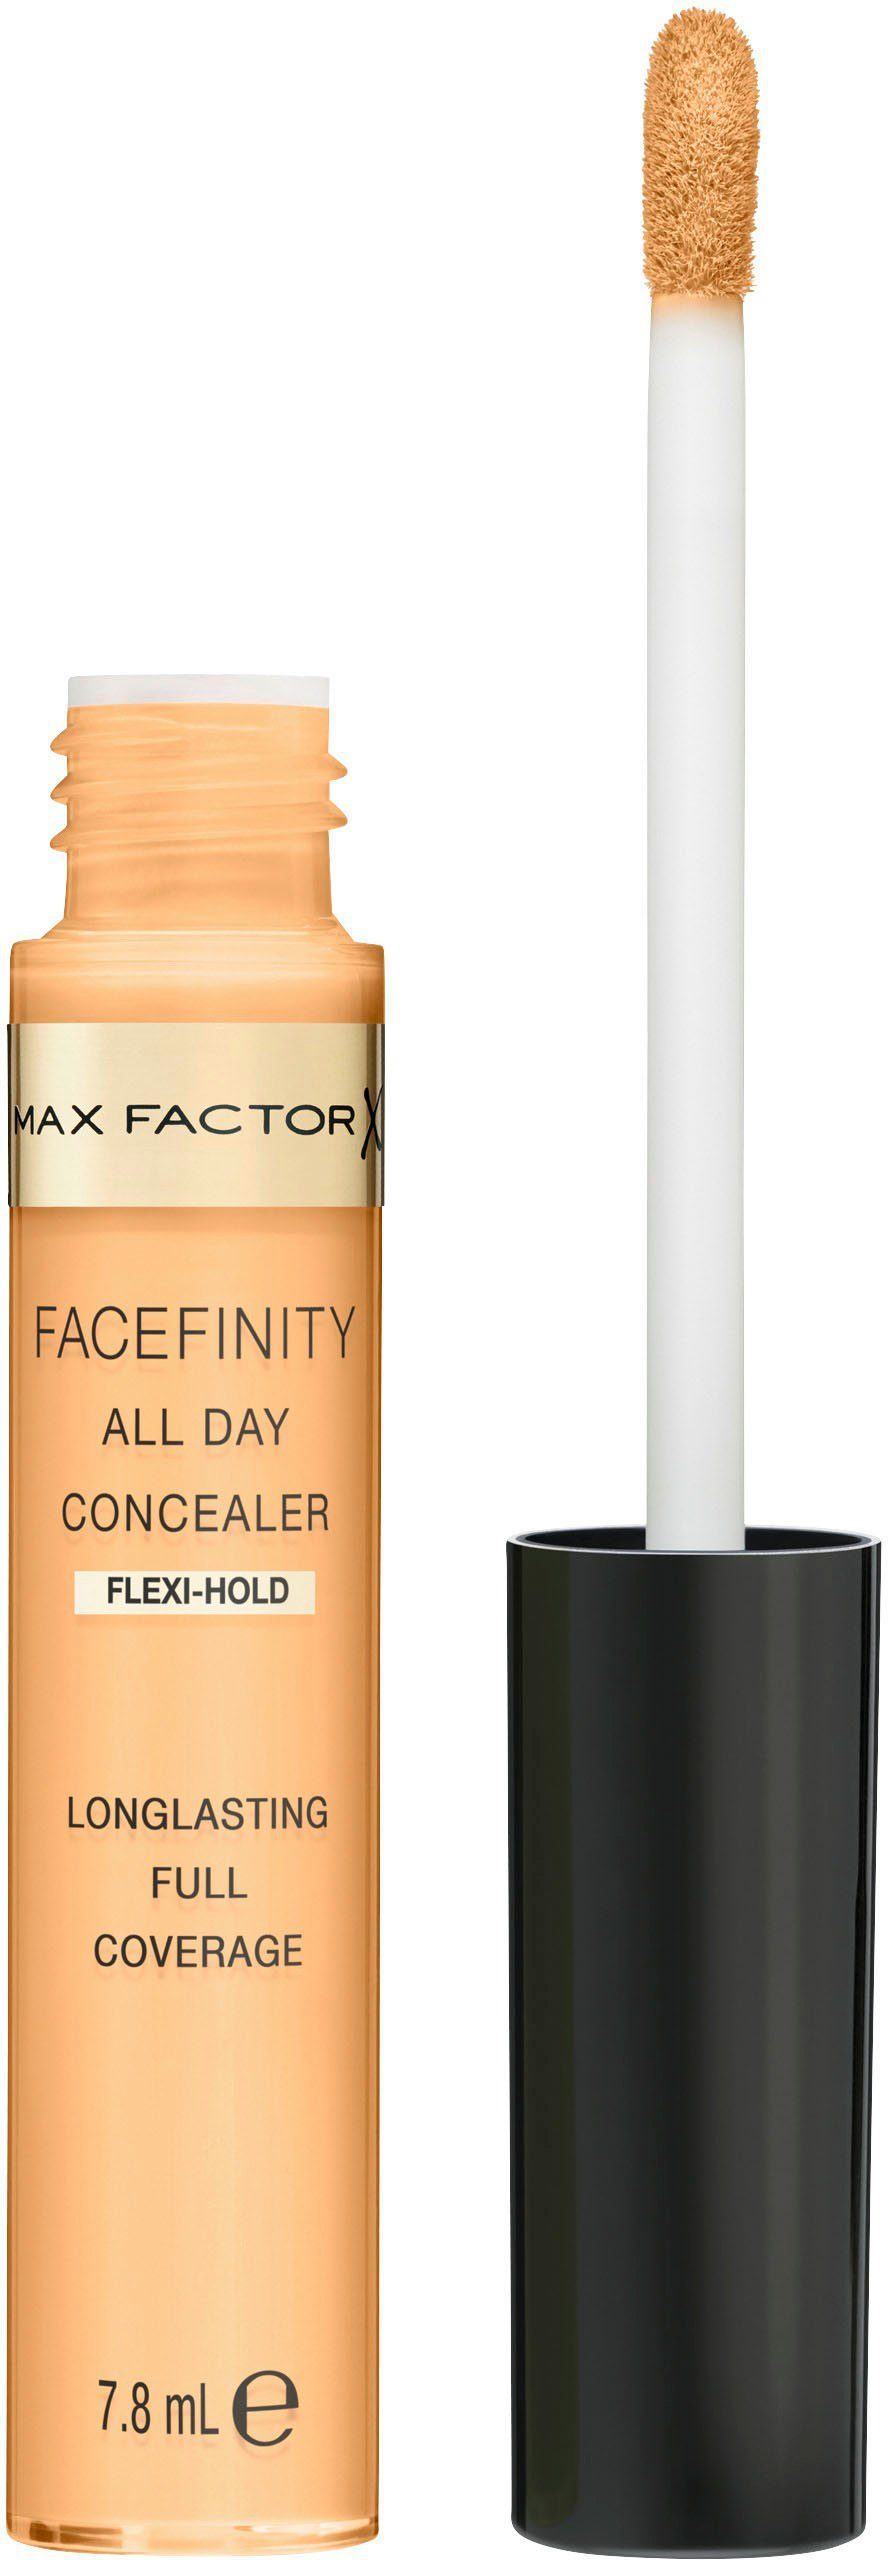 Flawless FACEFINITY Concealer 40 MAX FACTOR Day All